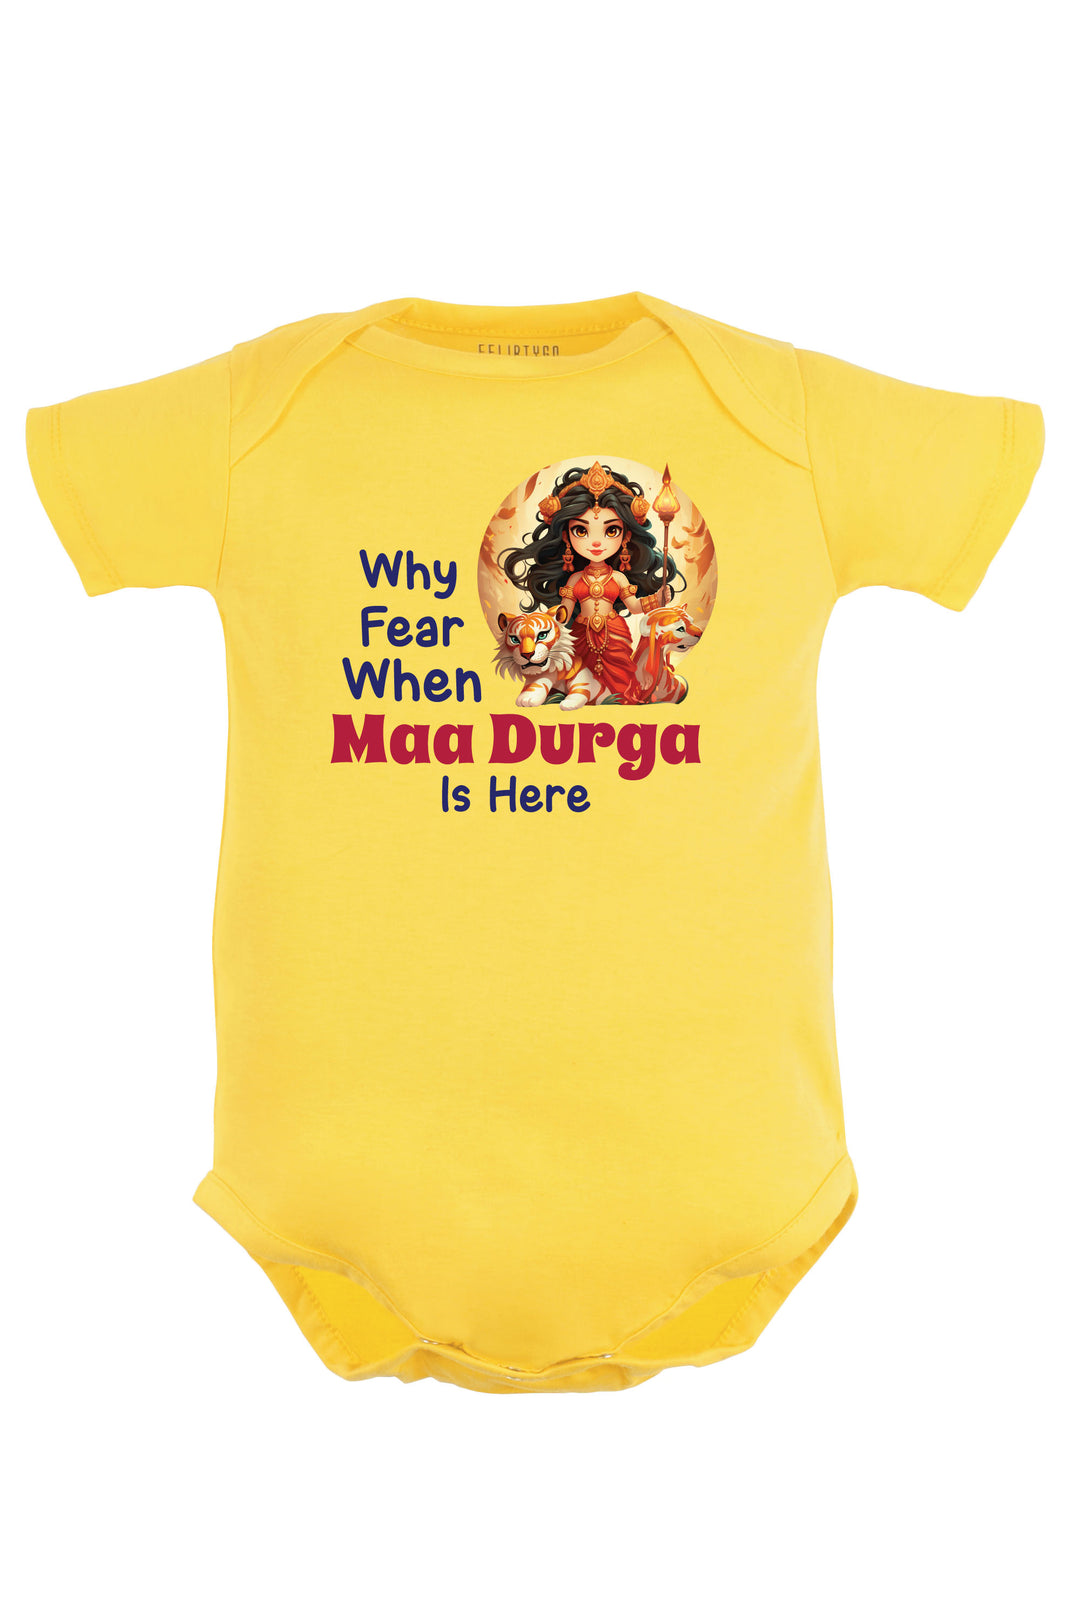 Why Fear When Maa Durga Is Here Baby Romper | Onesies